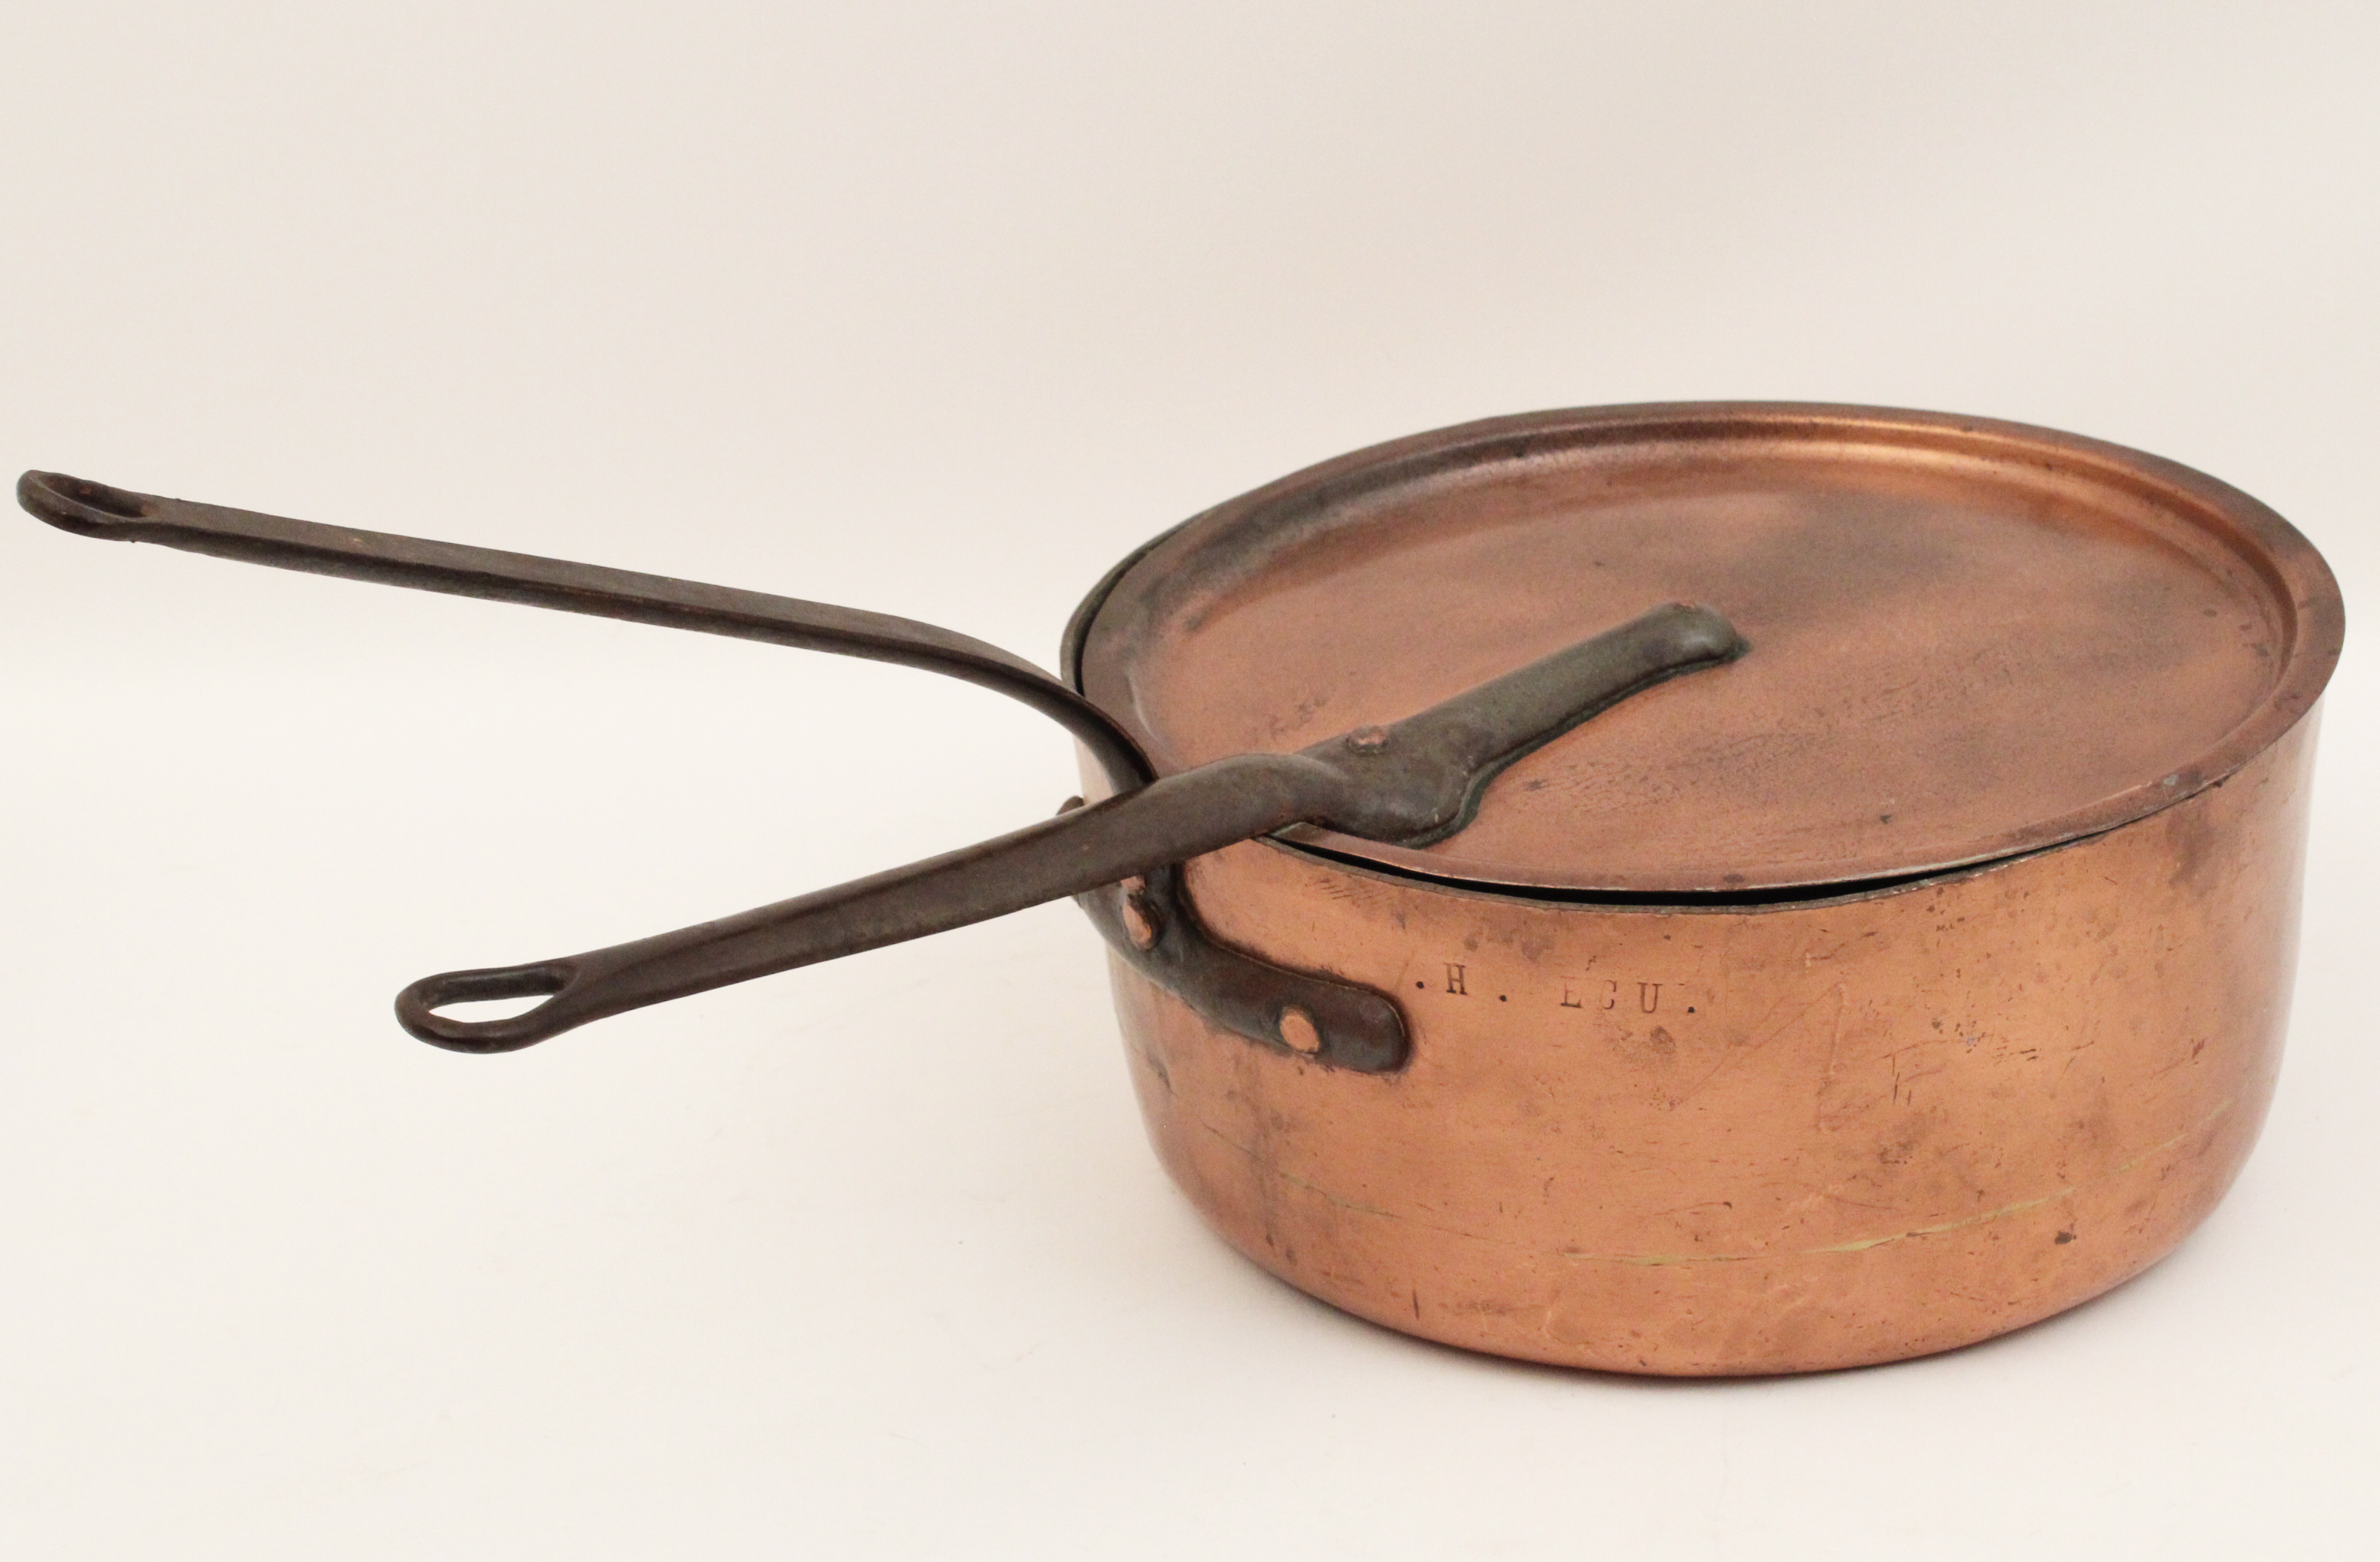 ANTIQUE FRENCH COPPER CULINARY